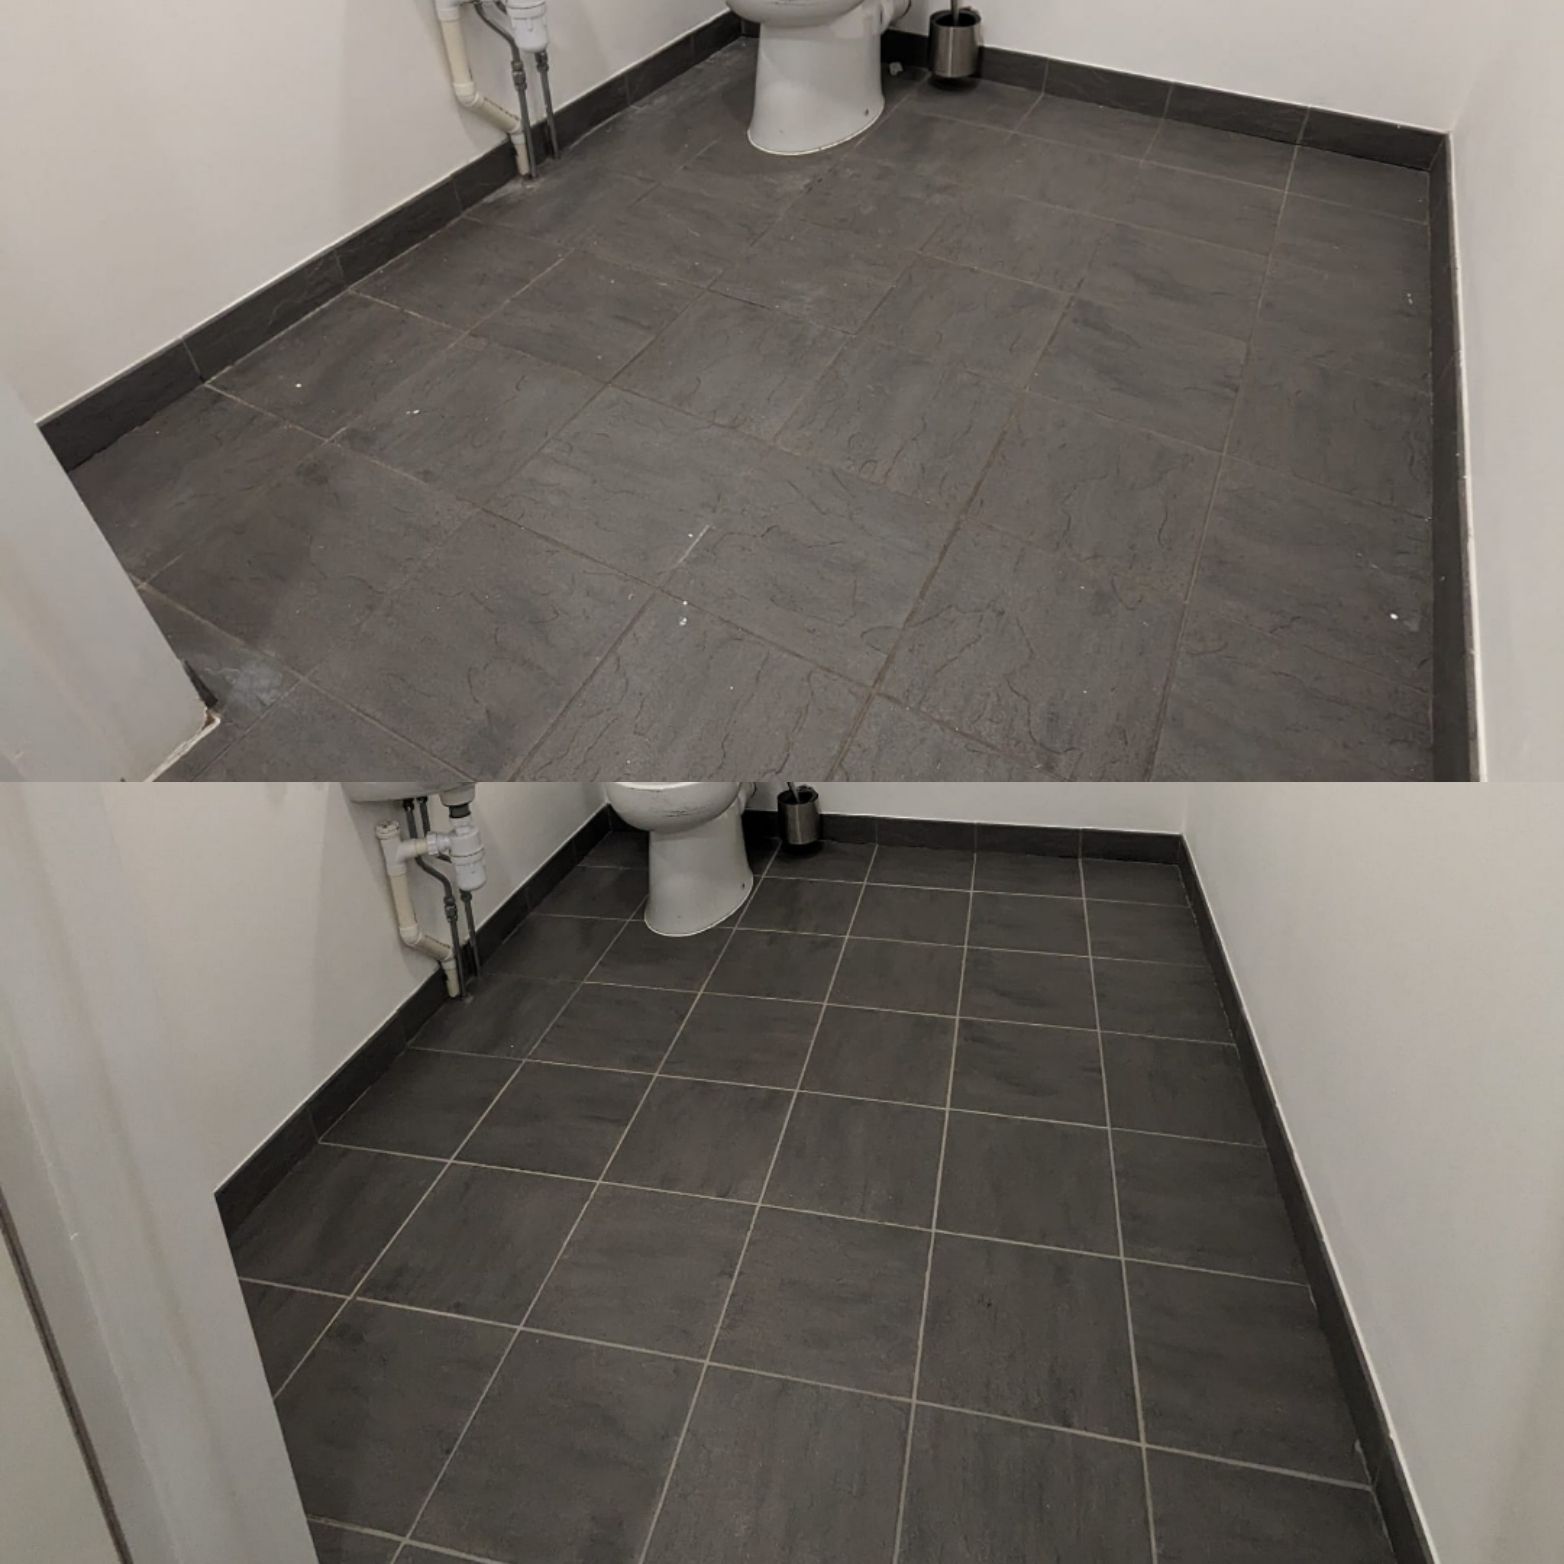 WASHROOM/TOILET TILE FLOOR DEEP CLEANING IN MANCHESTER CITY CENTRE